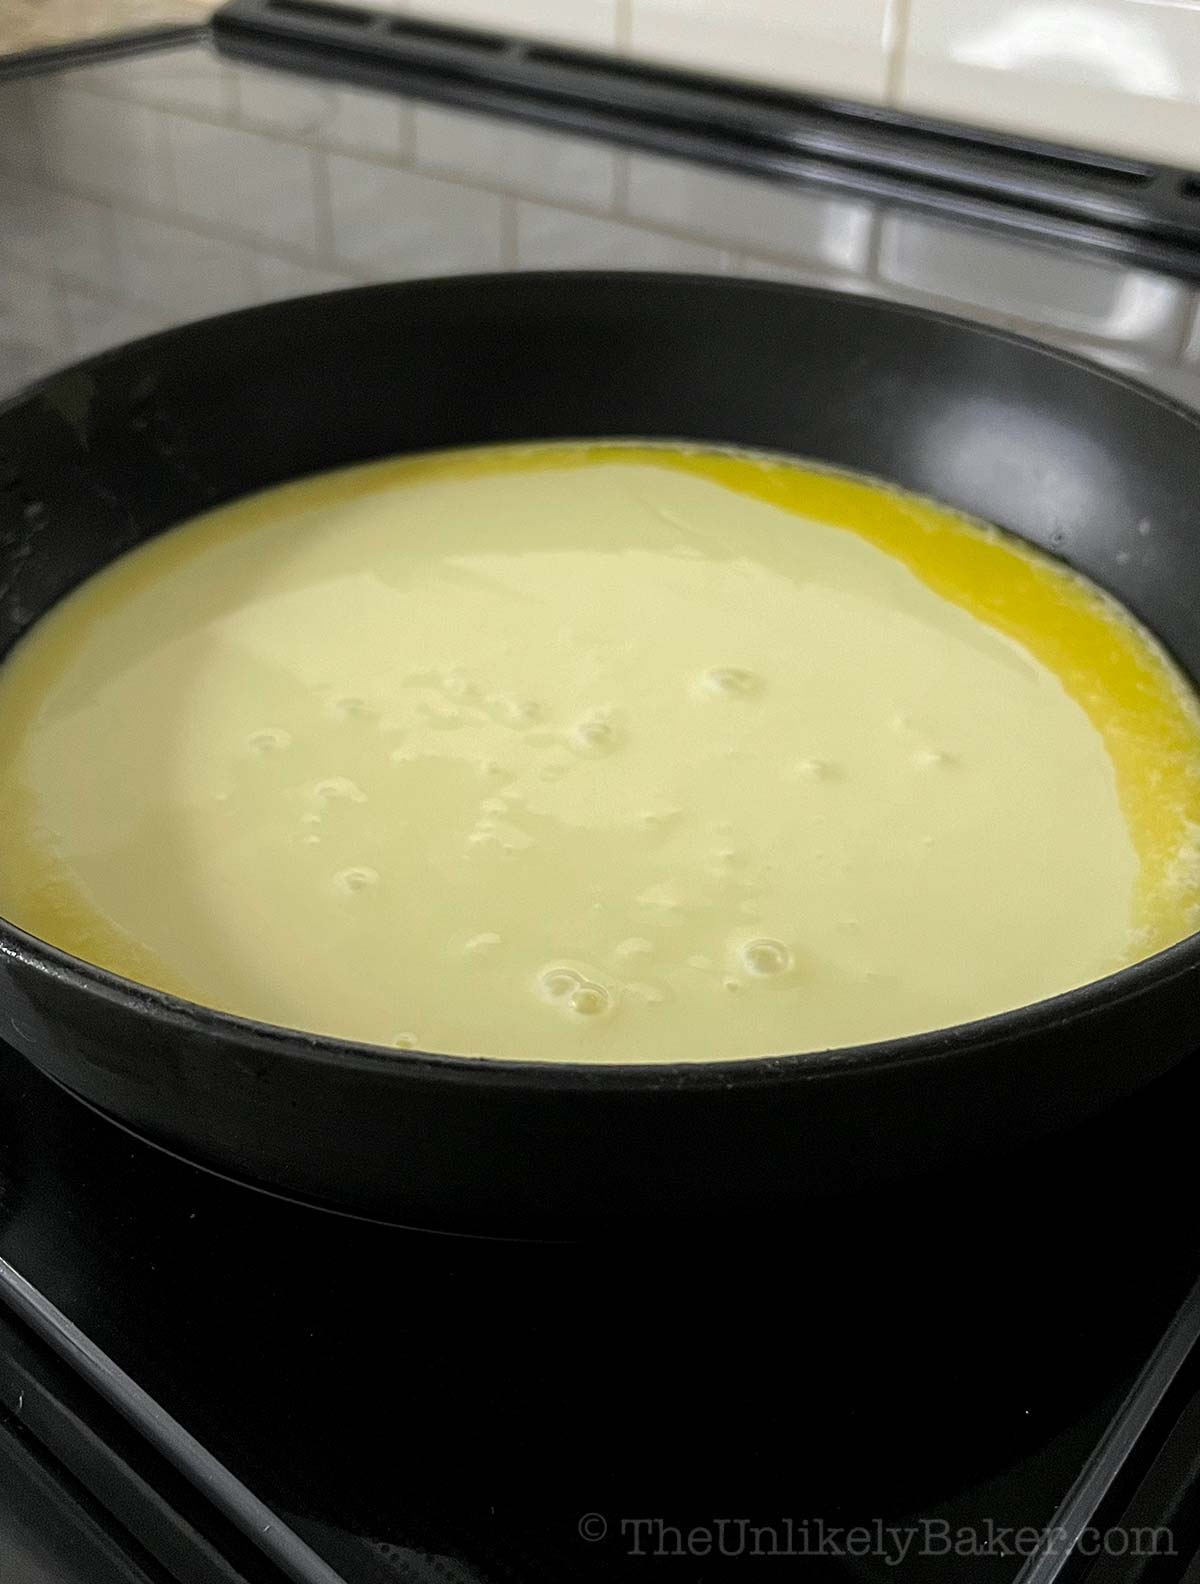 Condensed milk added to melted butter.